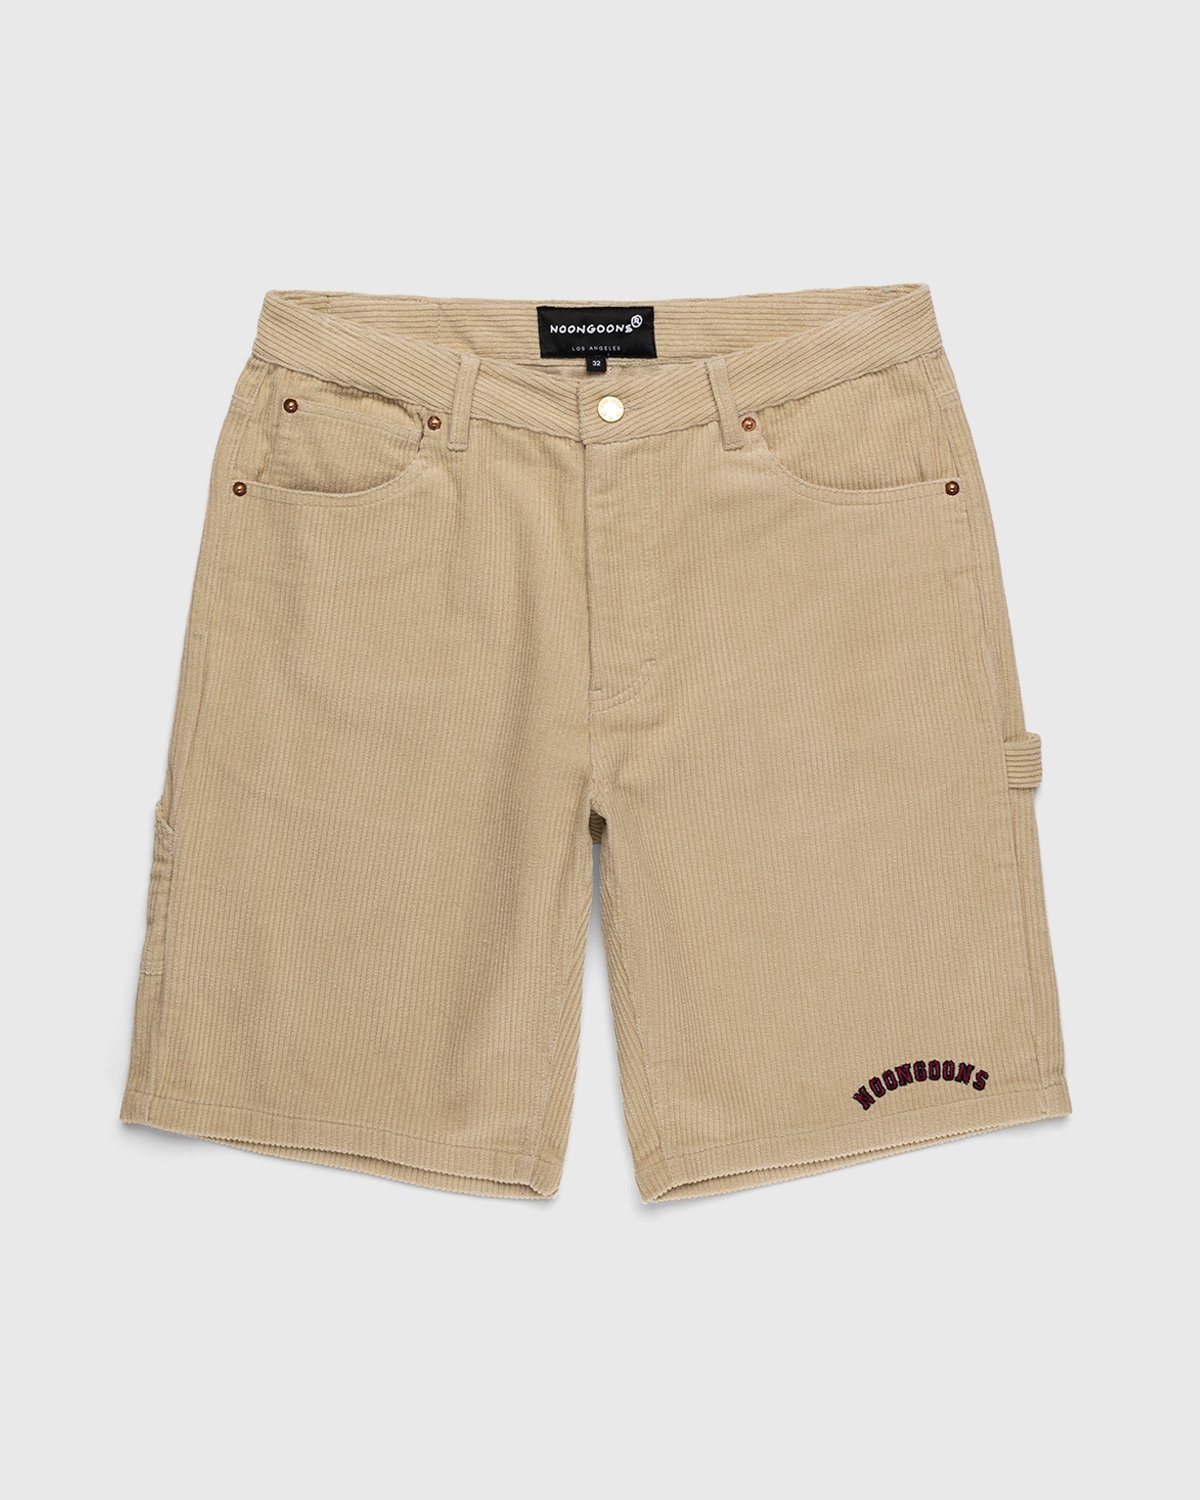 Noon Goons - Sublime Cord Short Overcast - Clothing - Beige - Image 1